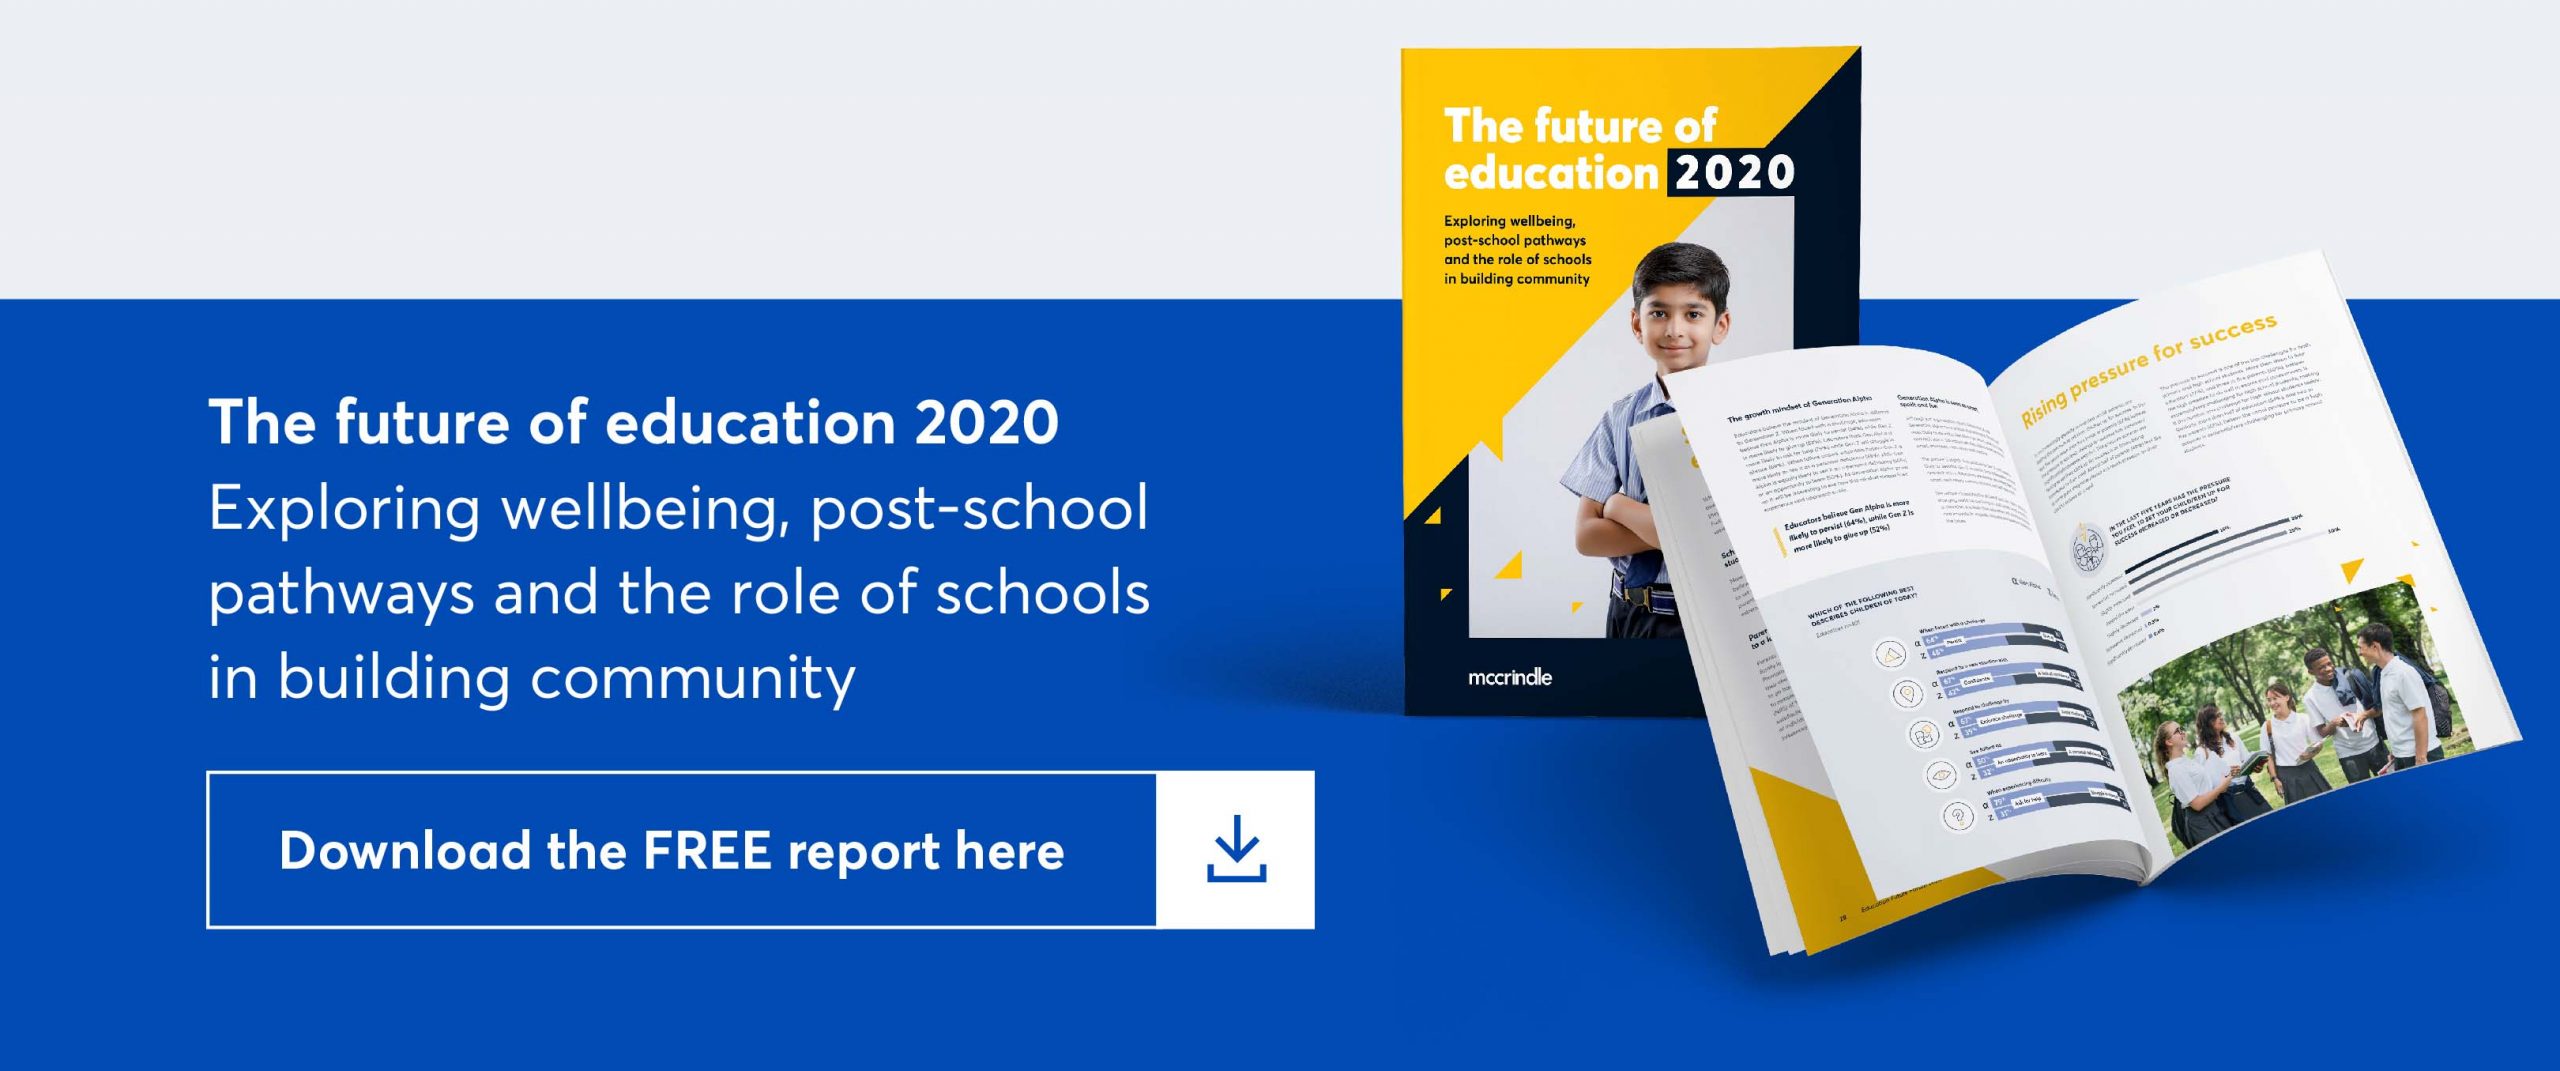 the future of education 2020. Exploring wellbeing, post-school pathways and the role of schools in building community. download the free report here